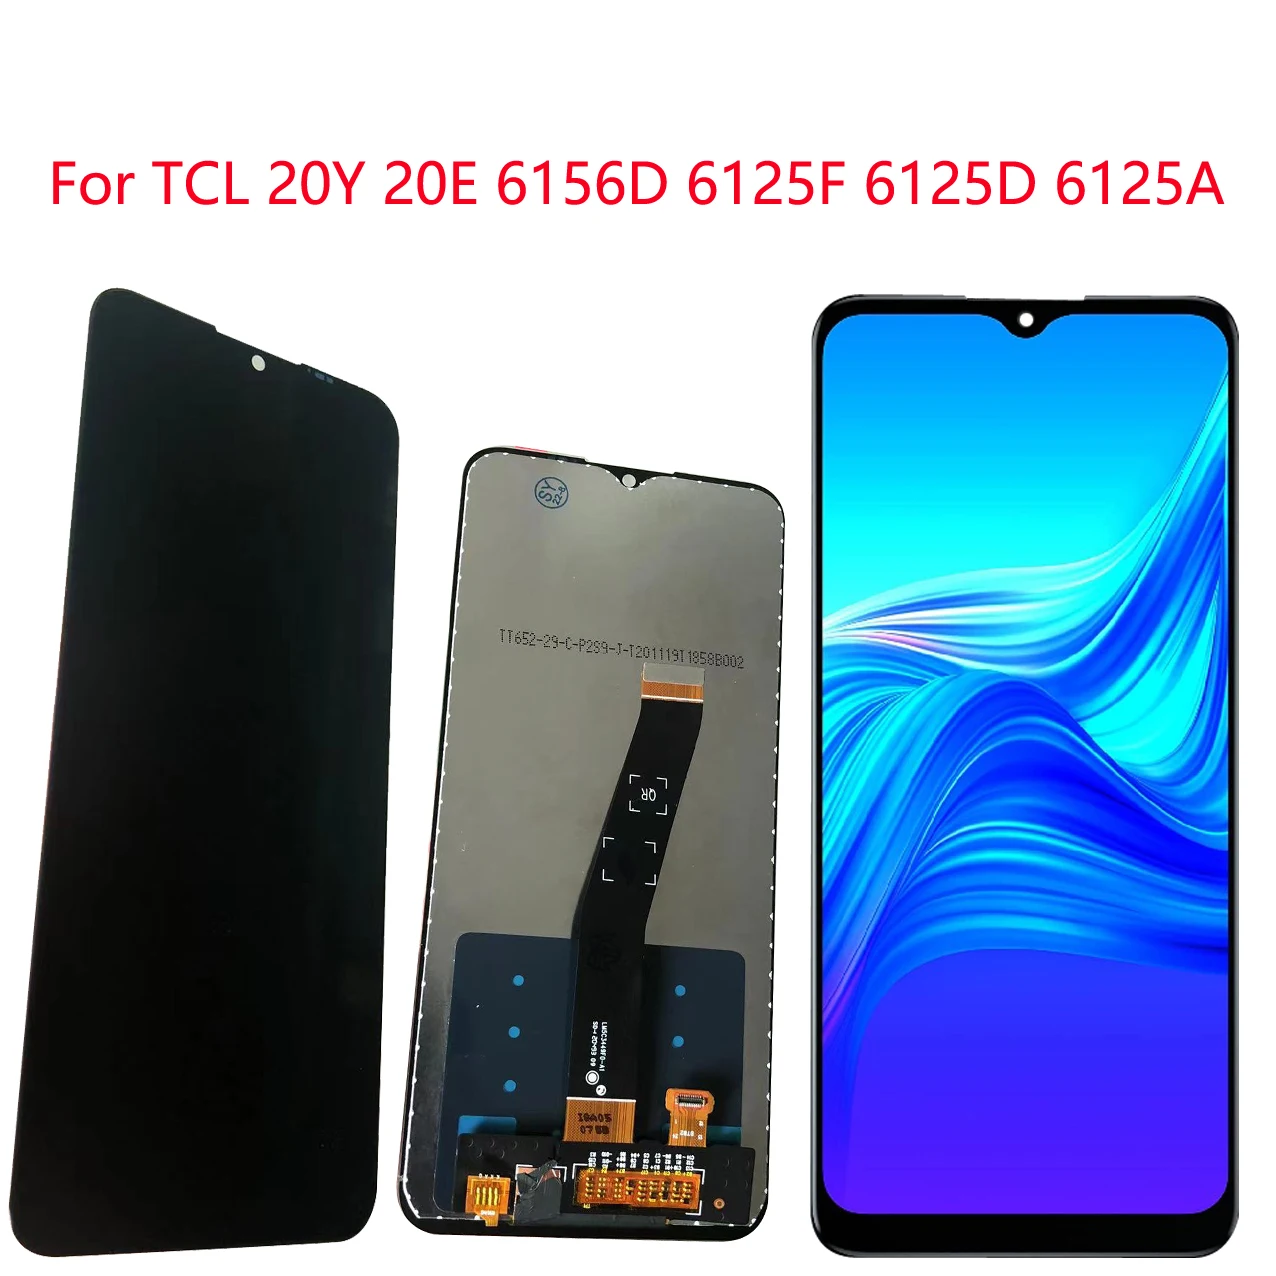 

100% TEST NEW Original For TCL 20Y 20E 6156D 6125F 6125D 6125A LCD Screen Display Touch Panel Digitizer Assembly